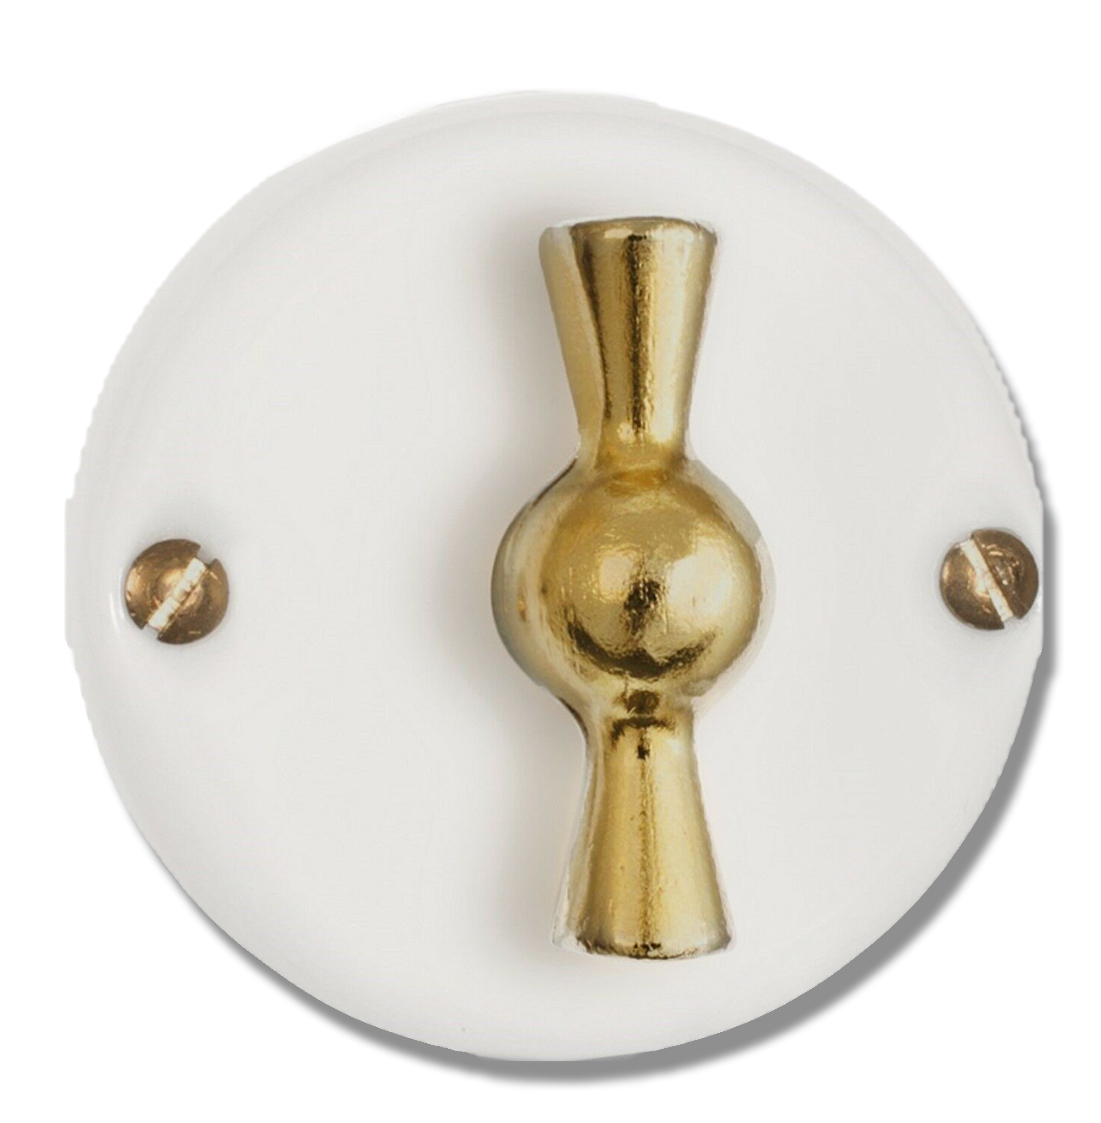 Porcelain switch insert with brass rotary switch. On/off toggle switch. Butterfly